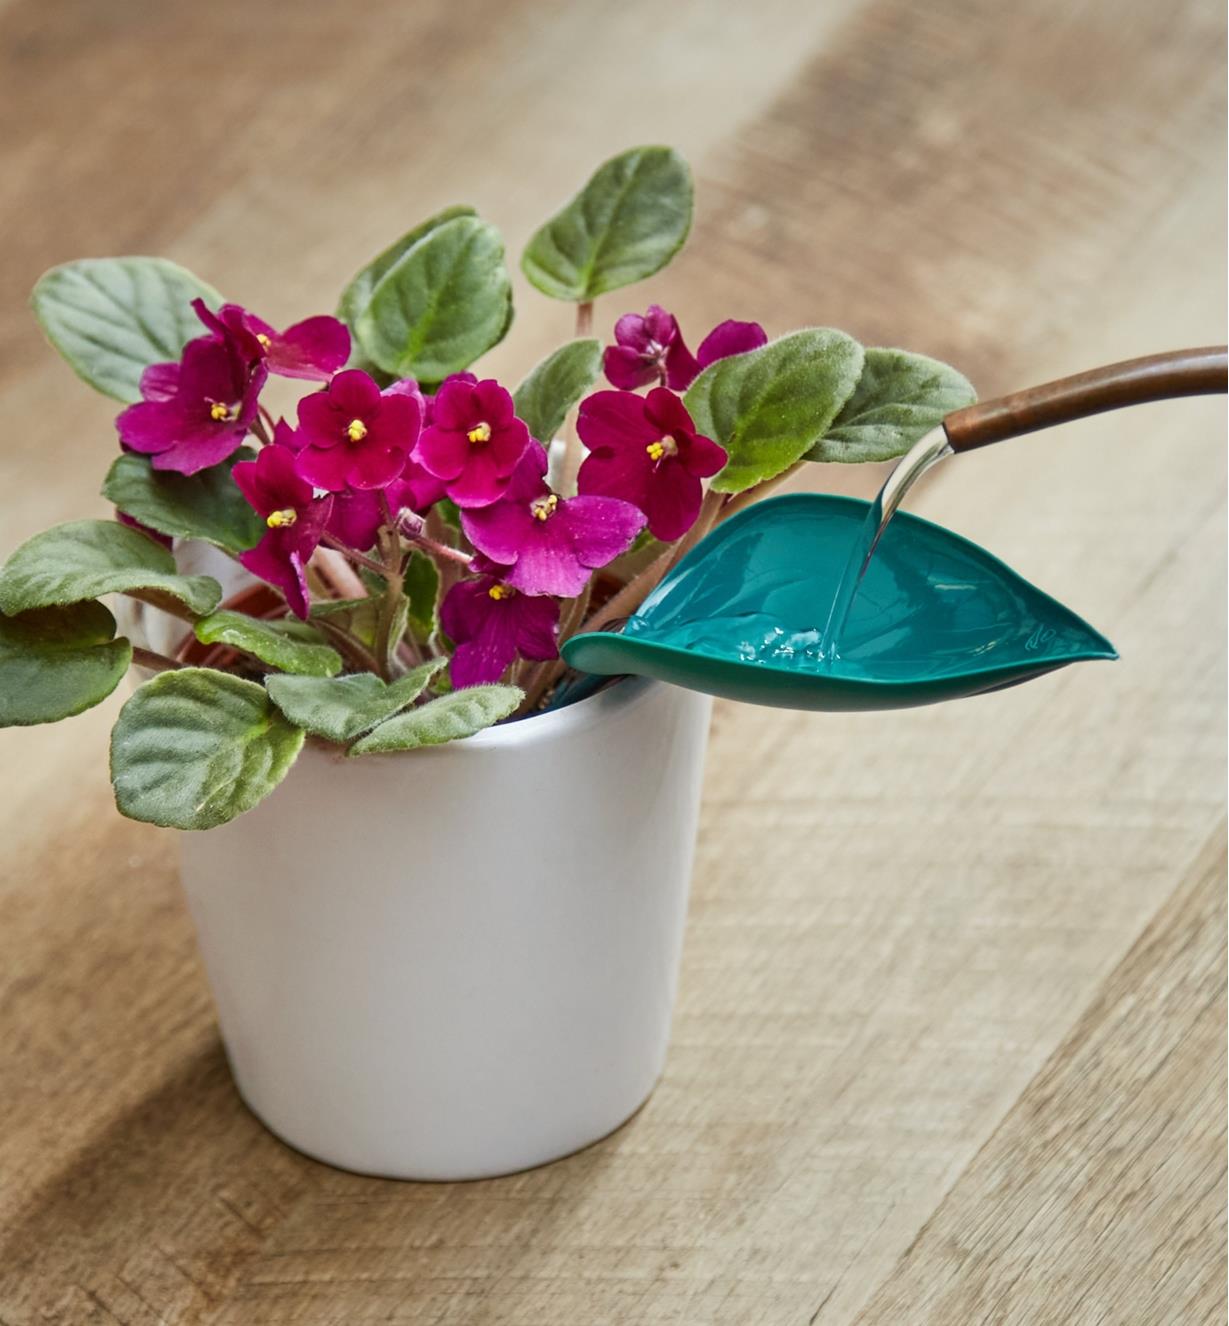 Pouring water onto a watering leaf inserted into a pot of African violets